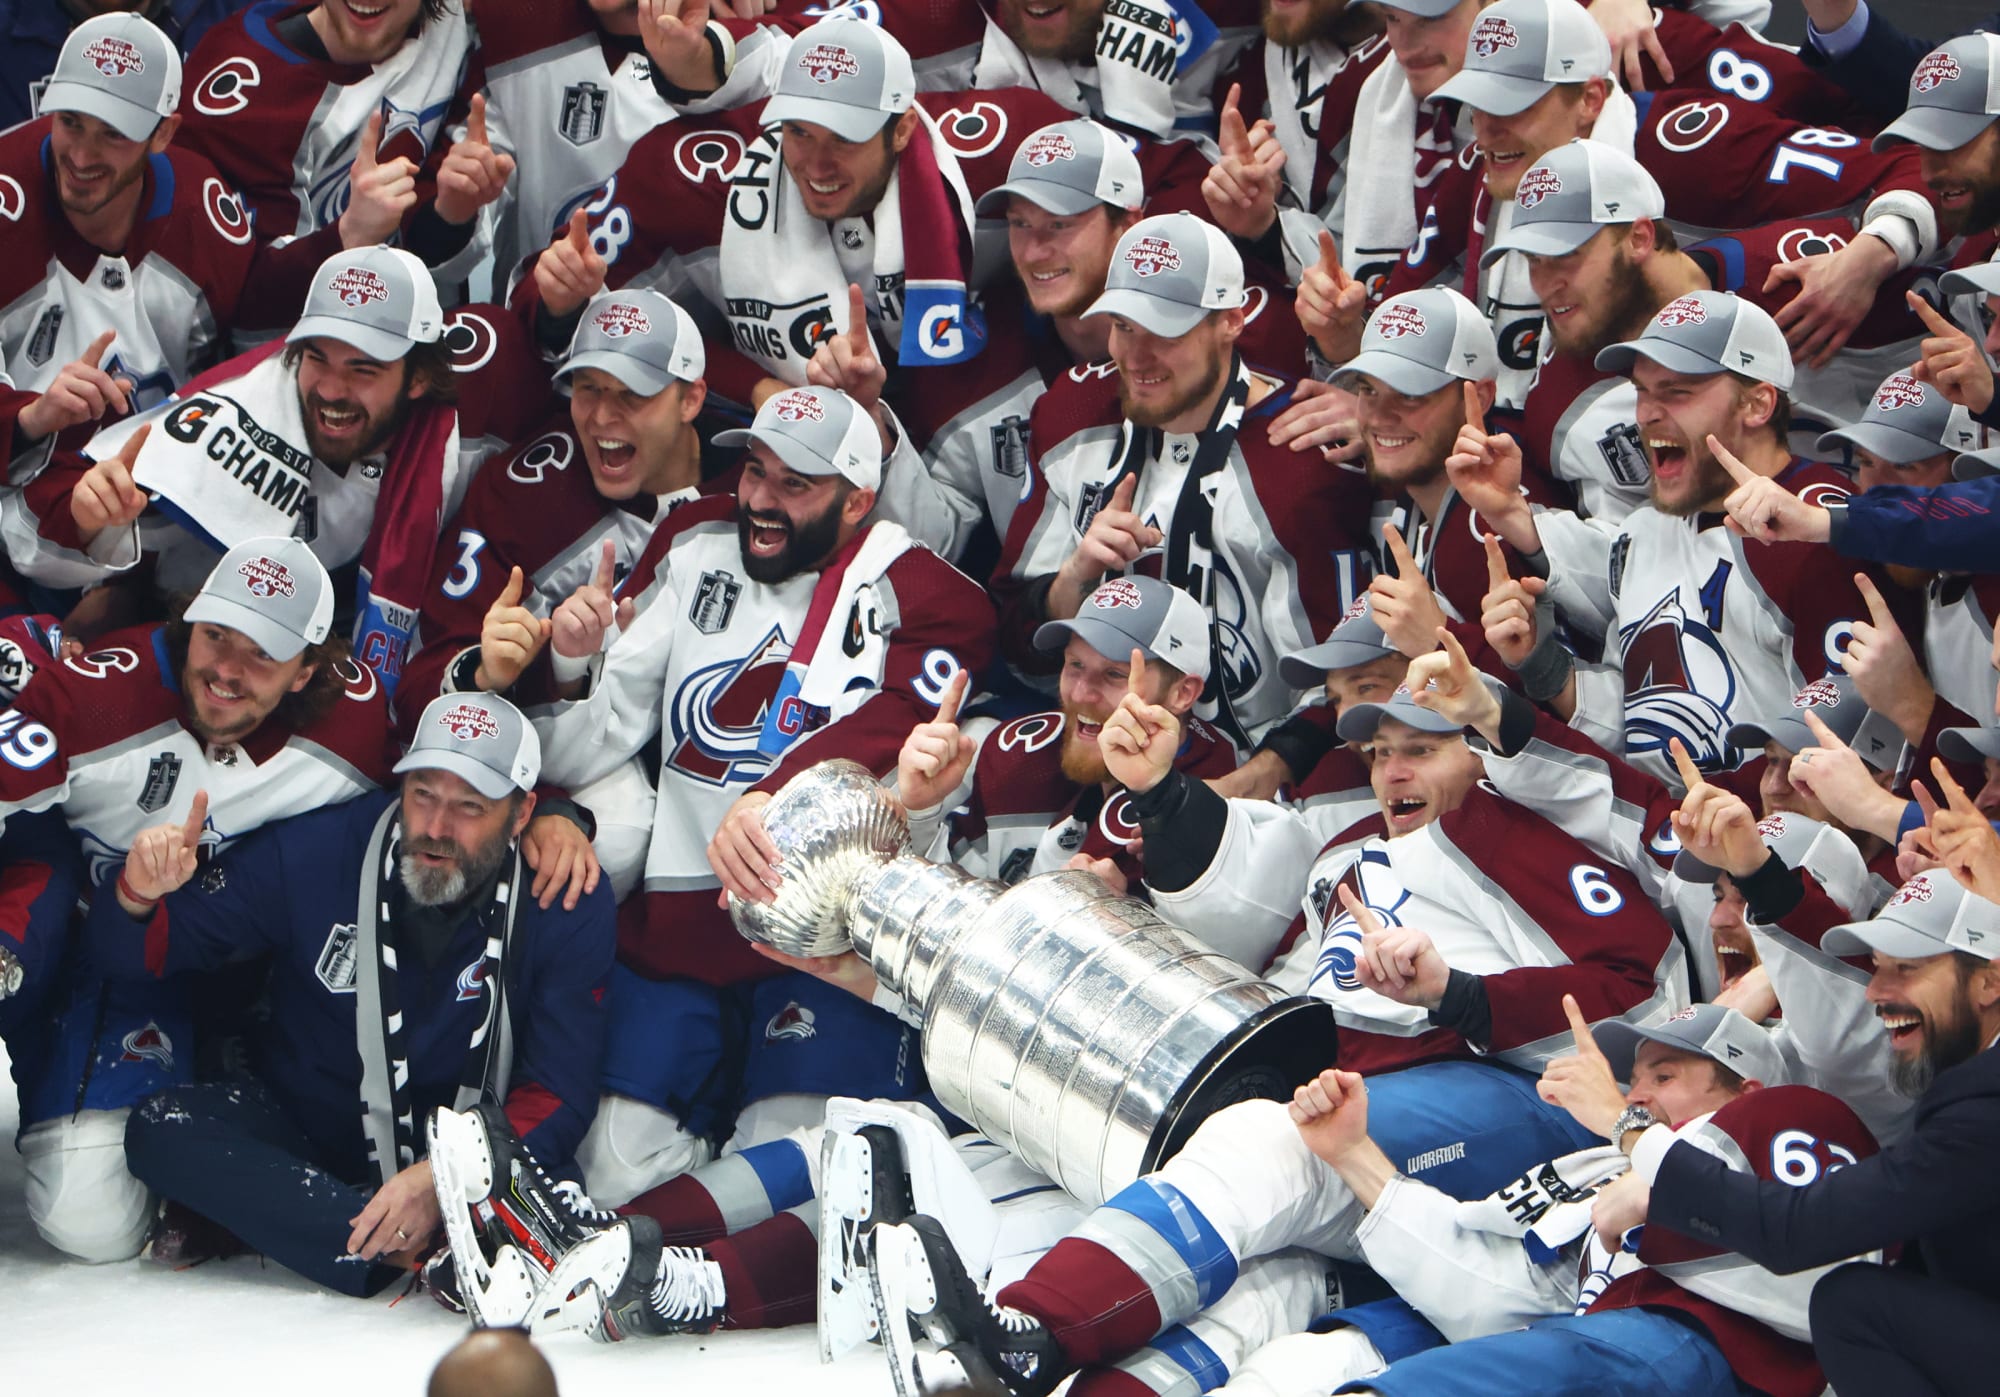 Taking a look at the 202223 Colorado Avalanche roster